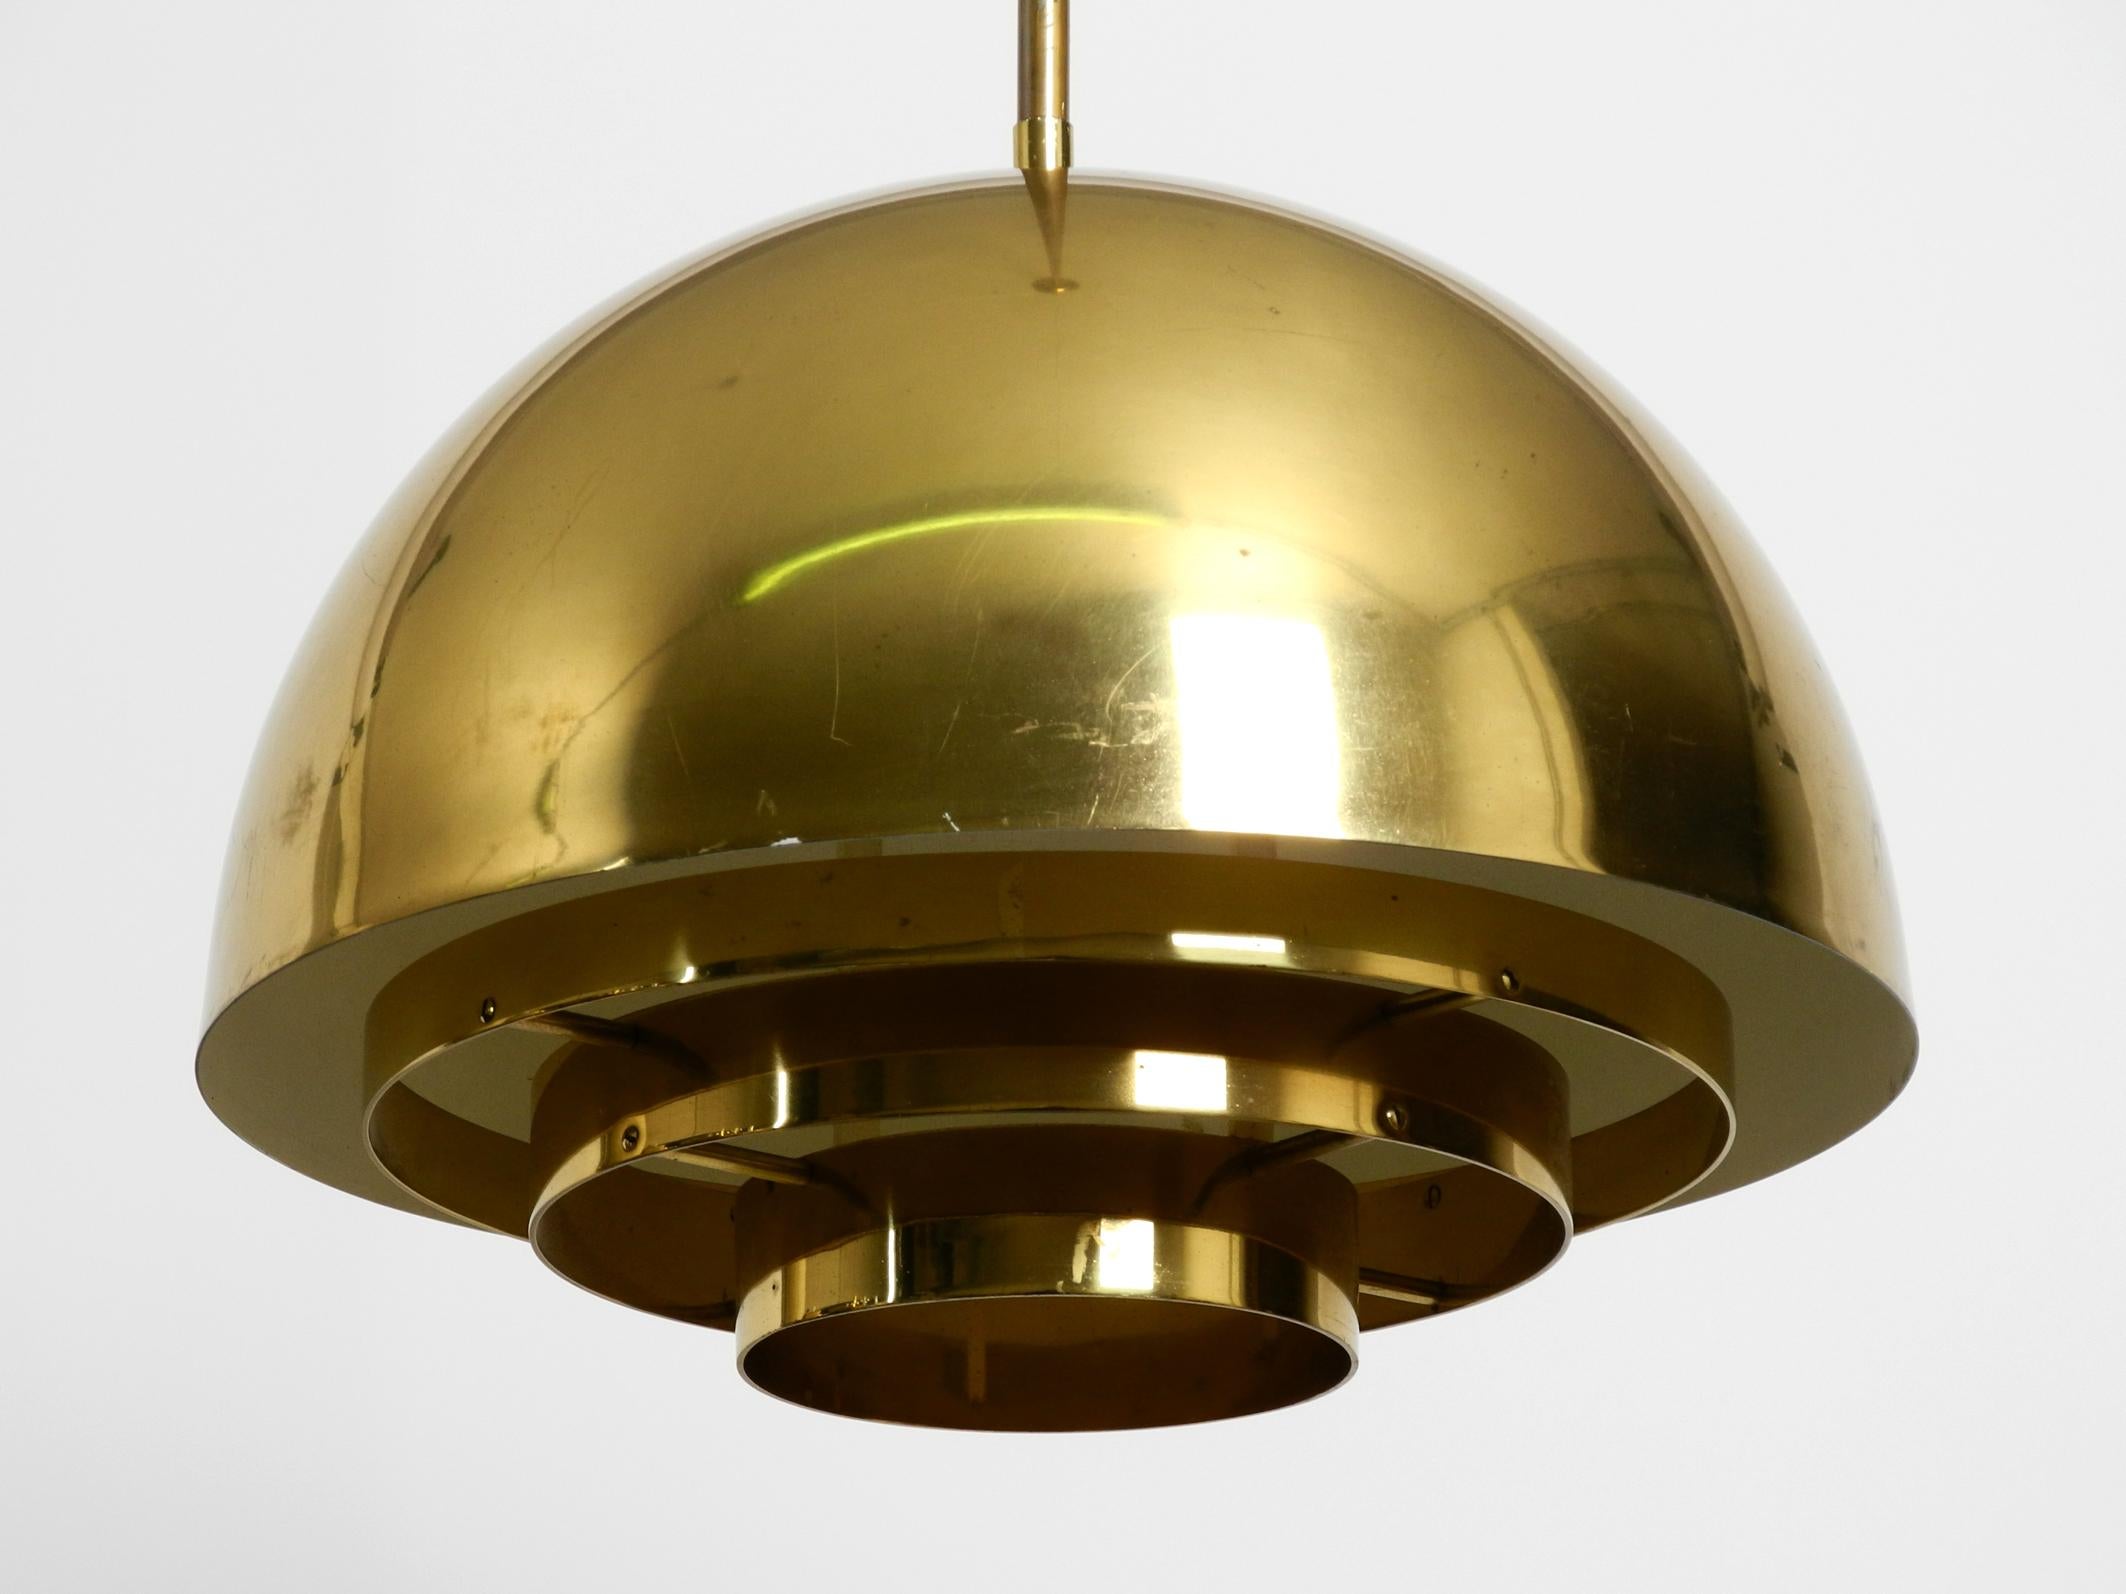 Beautiful and rare large mid century brass ceiling lamp from Vereinigte Werkstätten.
Very nice mid century dome slat design with a great patina.
Heavy high-quality elegant manufactured made of solid brass.
On E27 socket up to 100W.
100% original